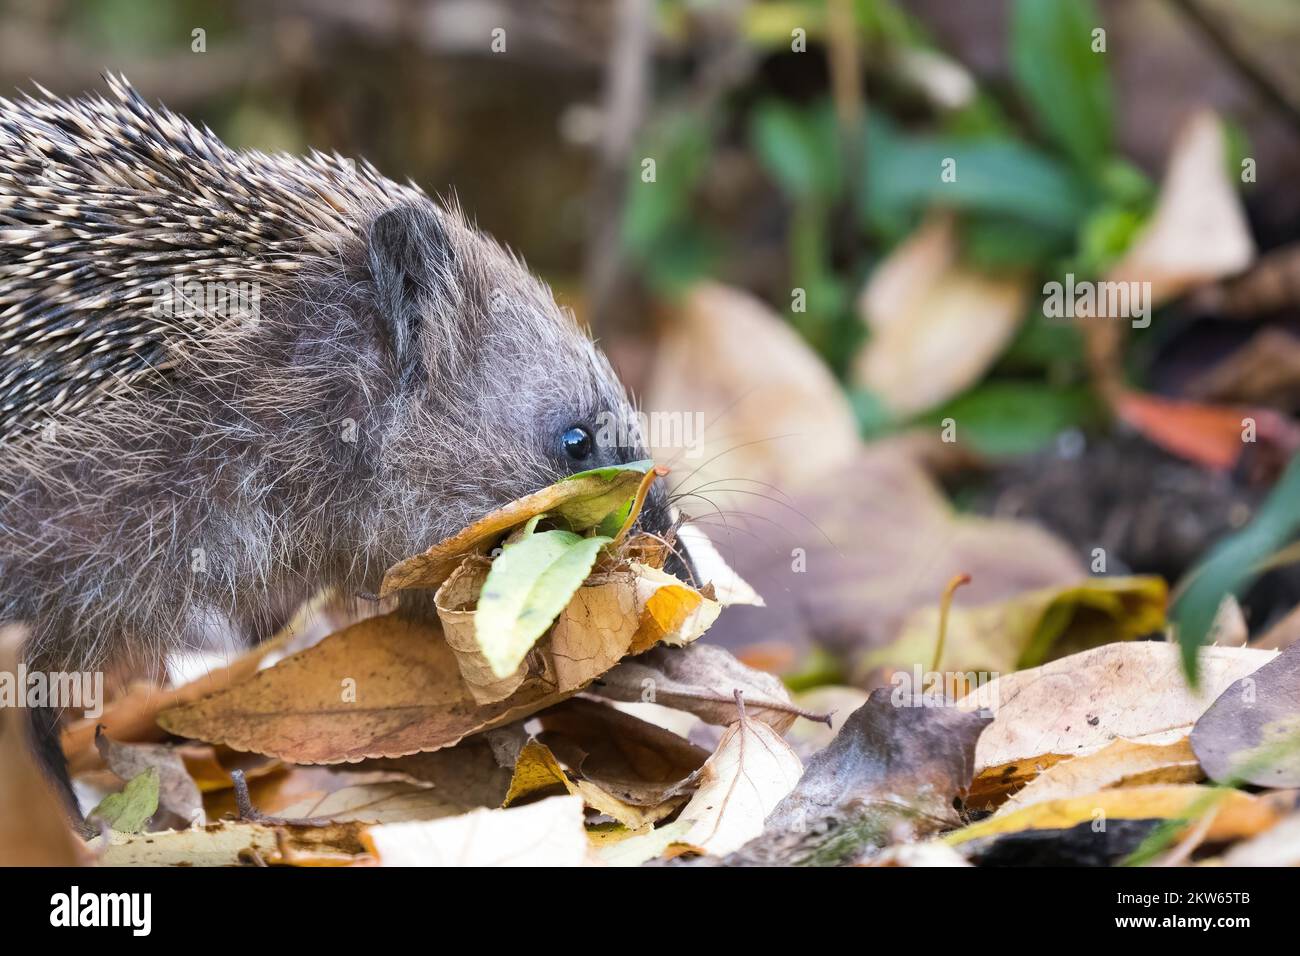 European hedgehog (Erinaceus europaeus) with collected leaves in its mouth, animal portrait, Hesse, Germany, Europe Stock Photo